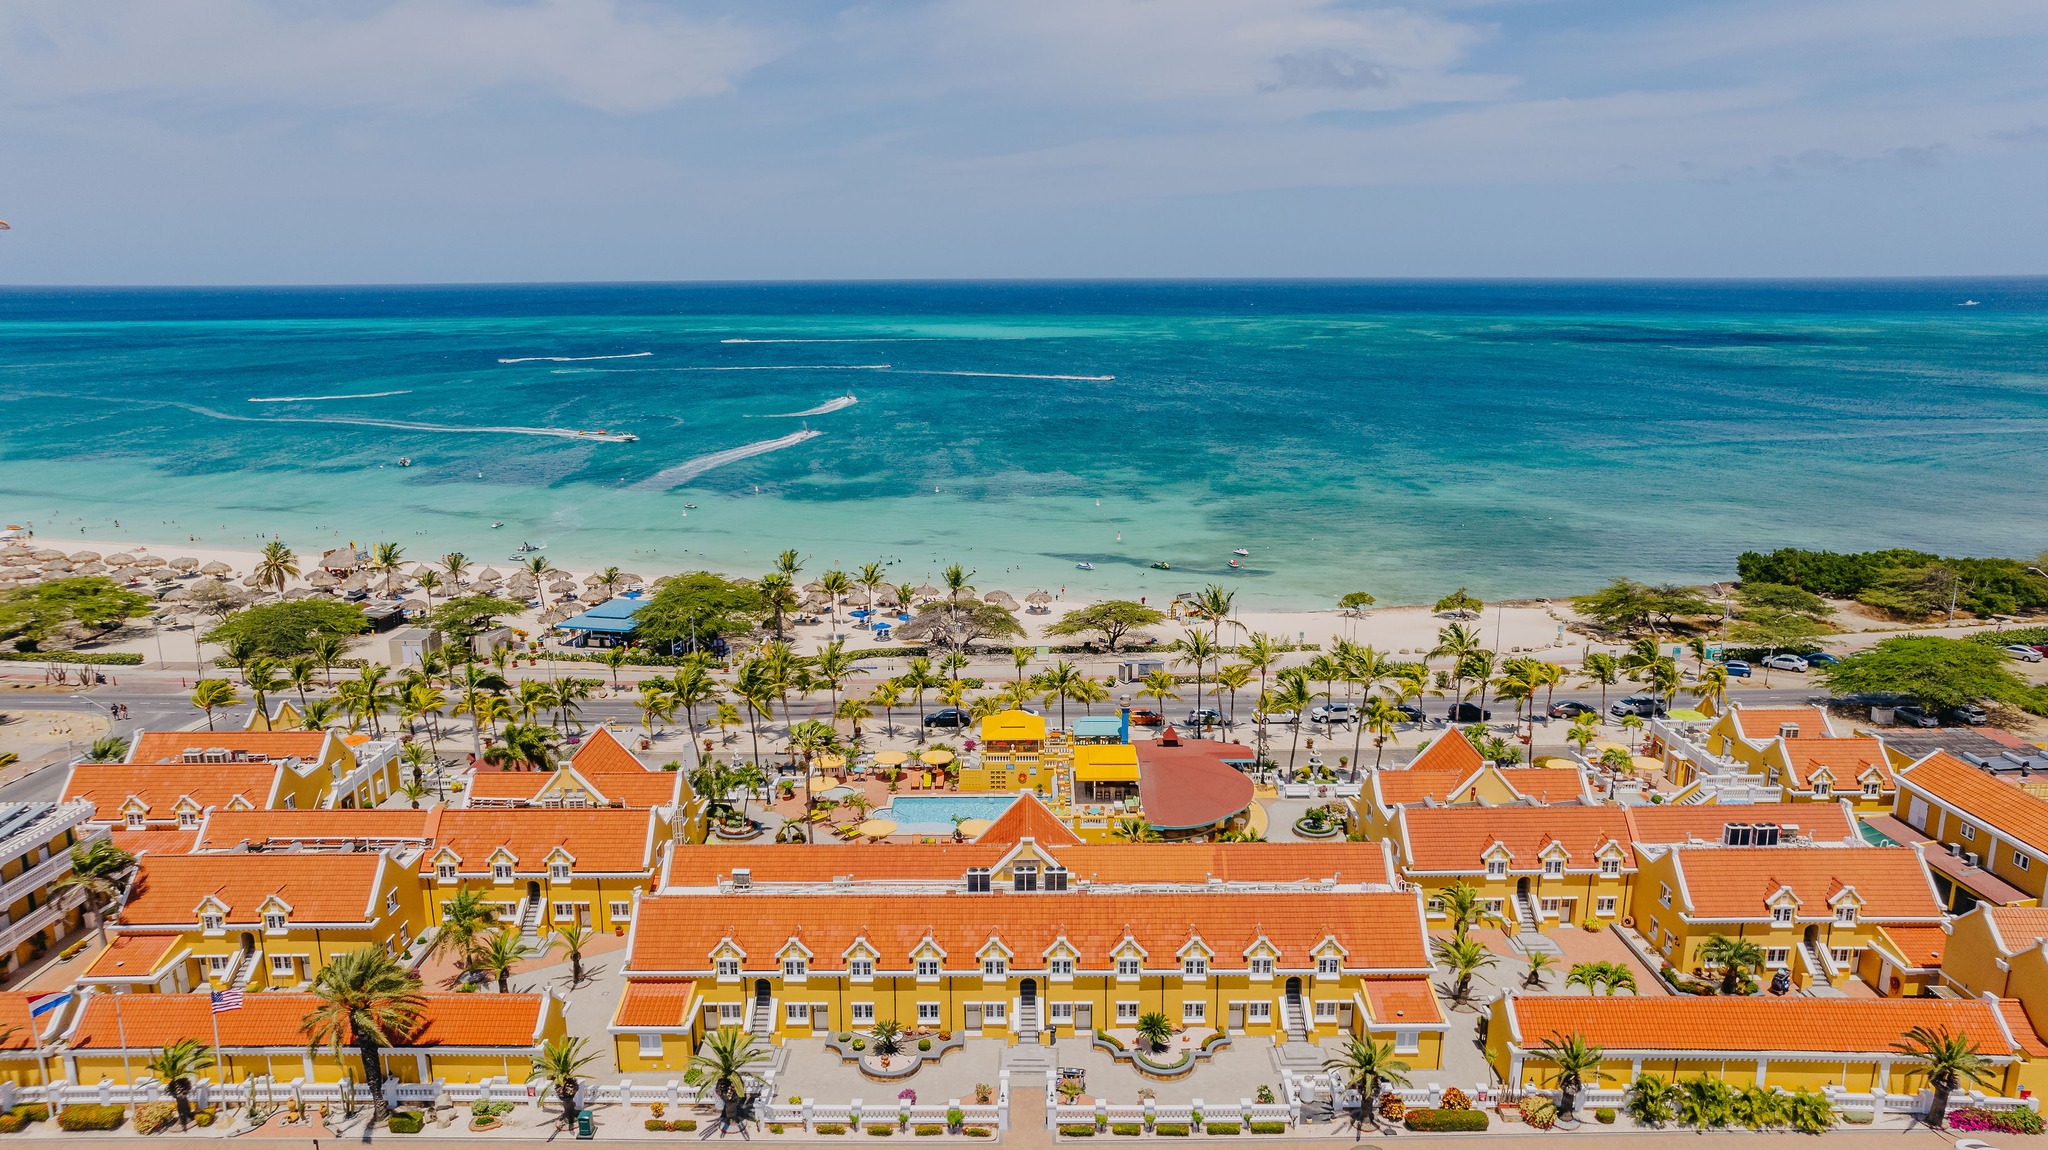 Our guide will help you plan a honeymoon to Aruba.